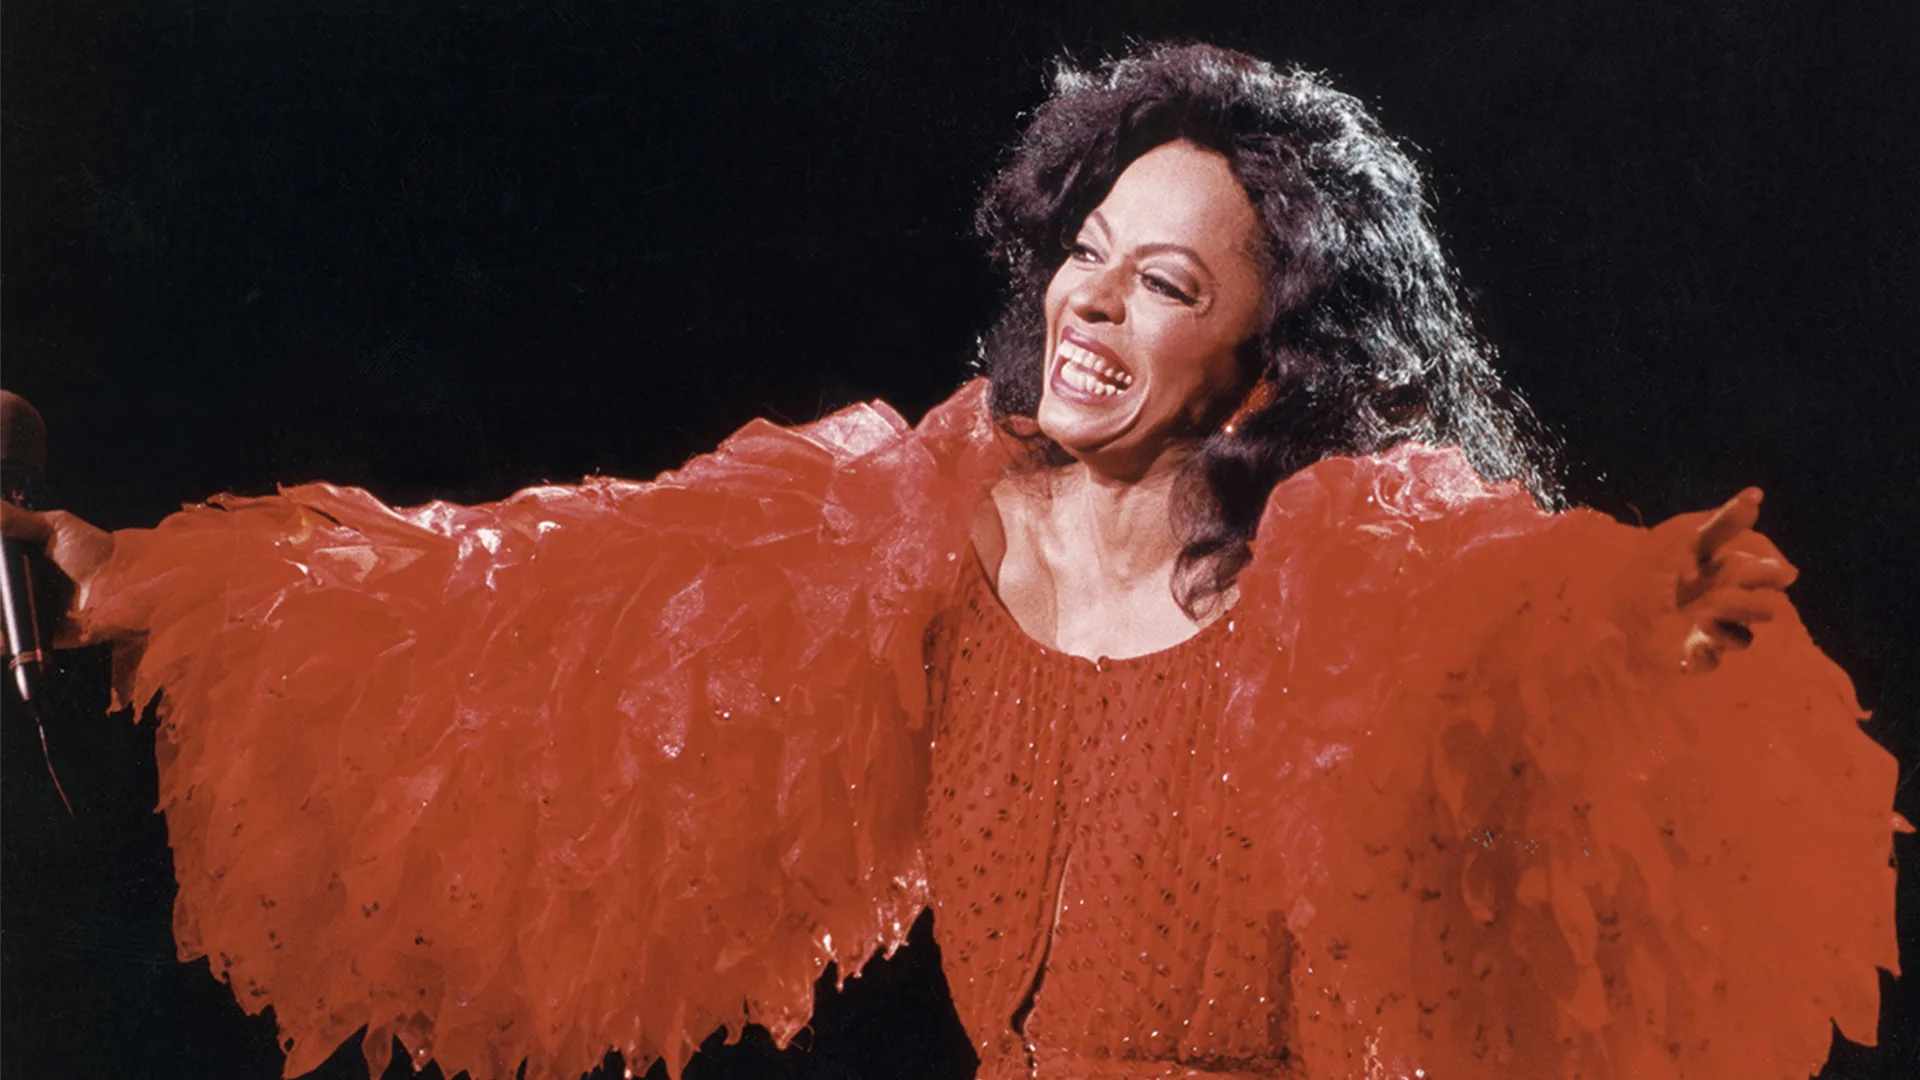 Diana Ross performing on stage